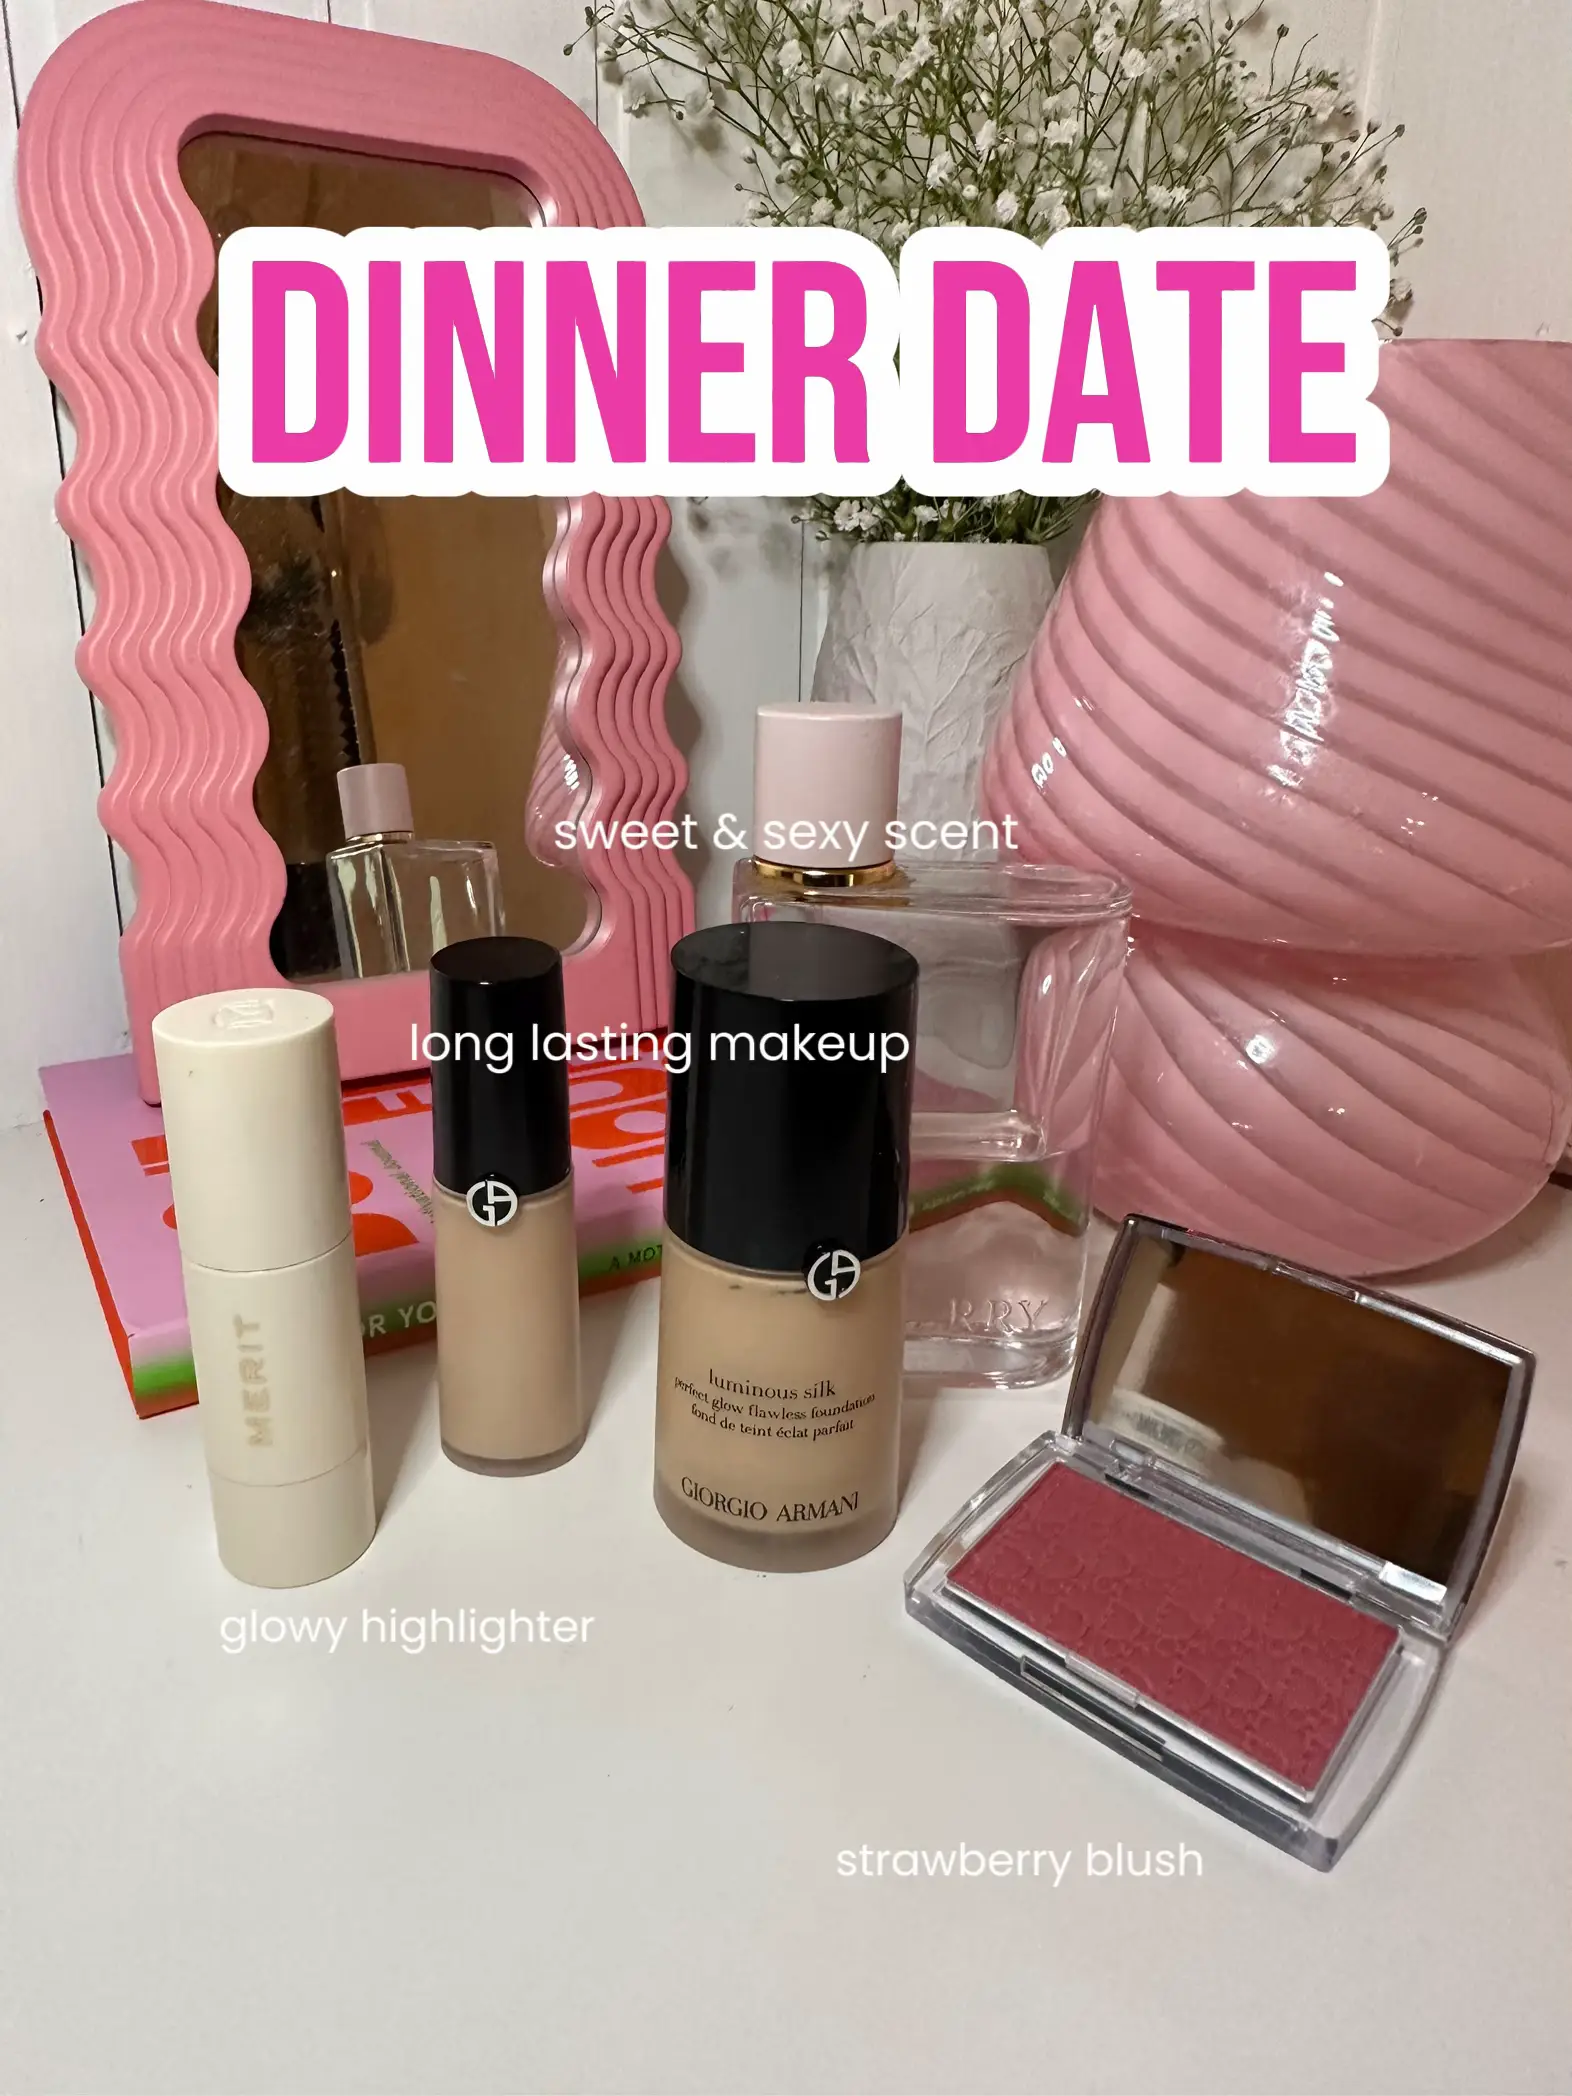  A pink table with a vase and a box of makeup on it.